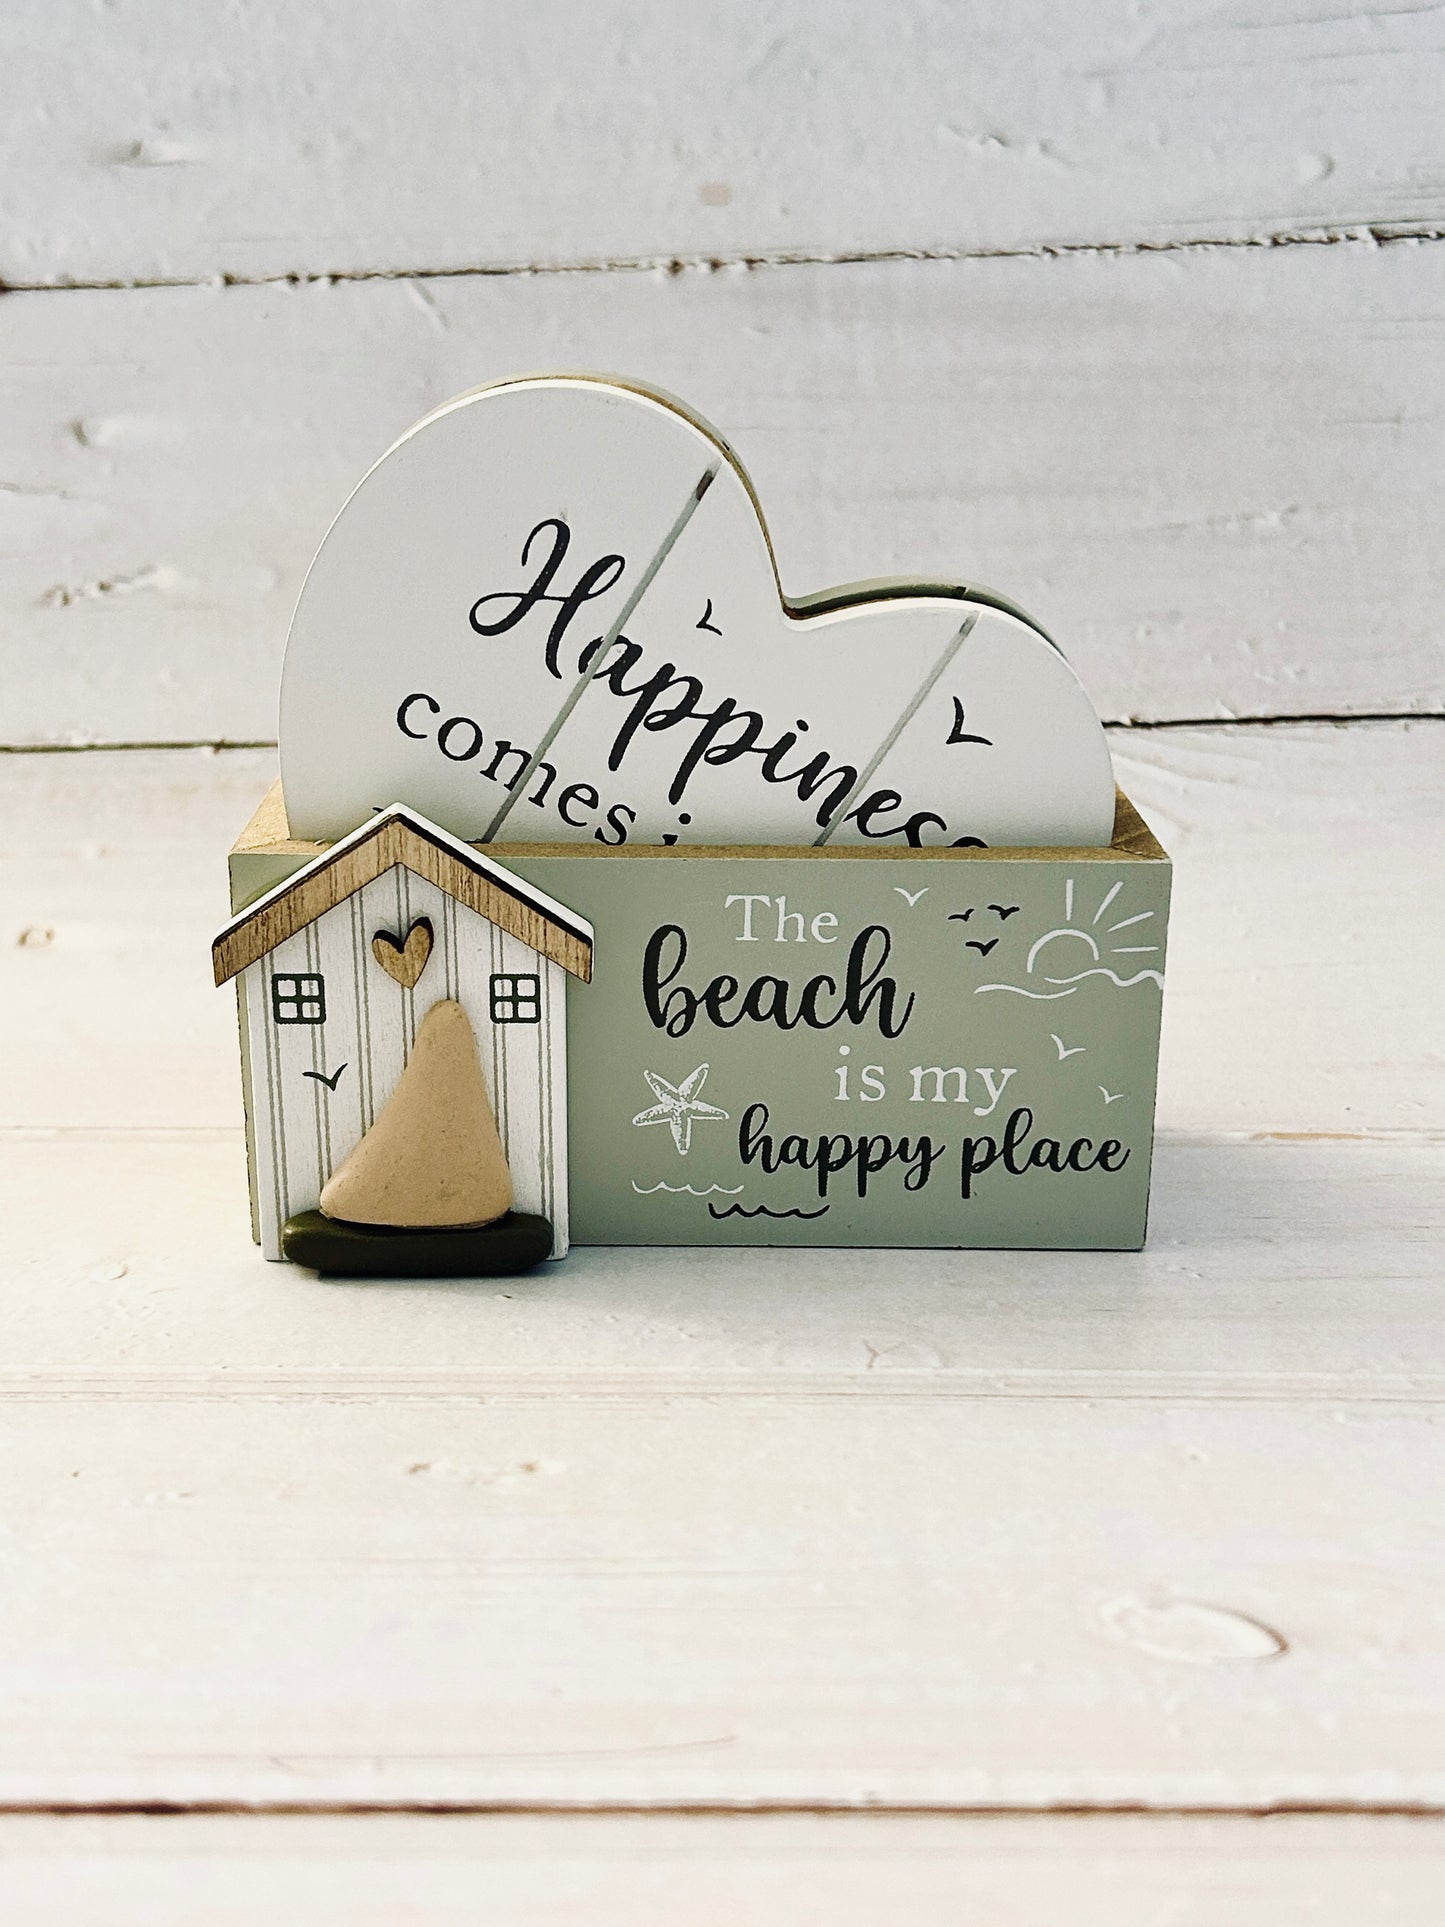 Happy Place Beach Coasters - 4 Pack